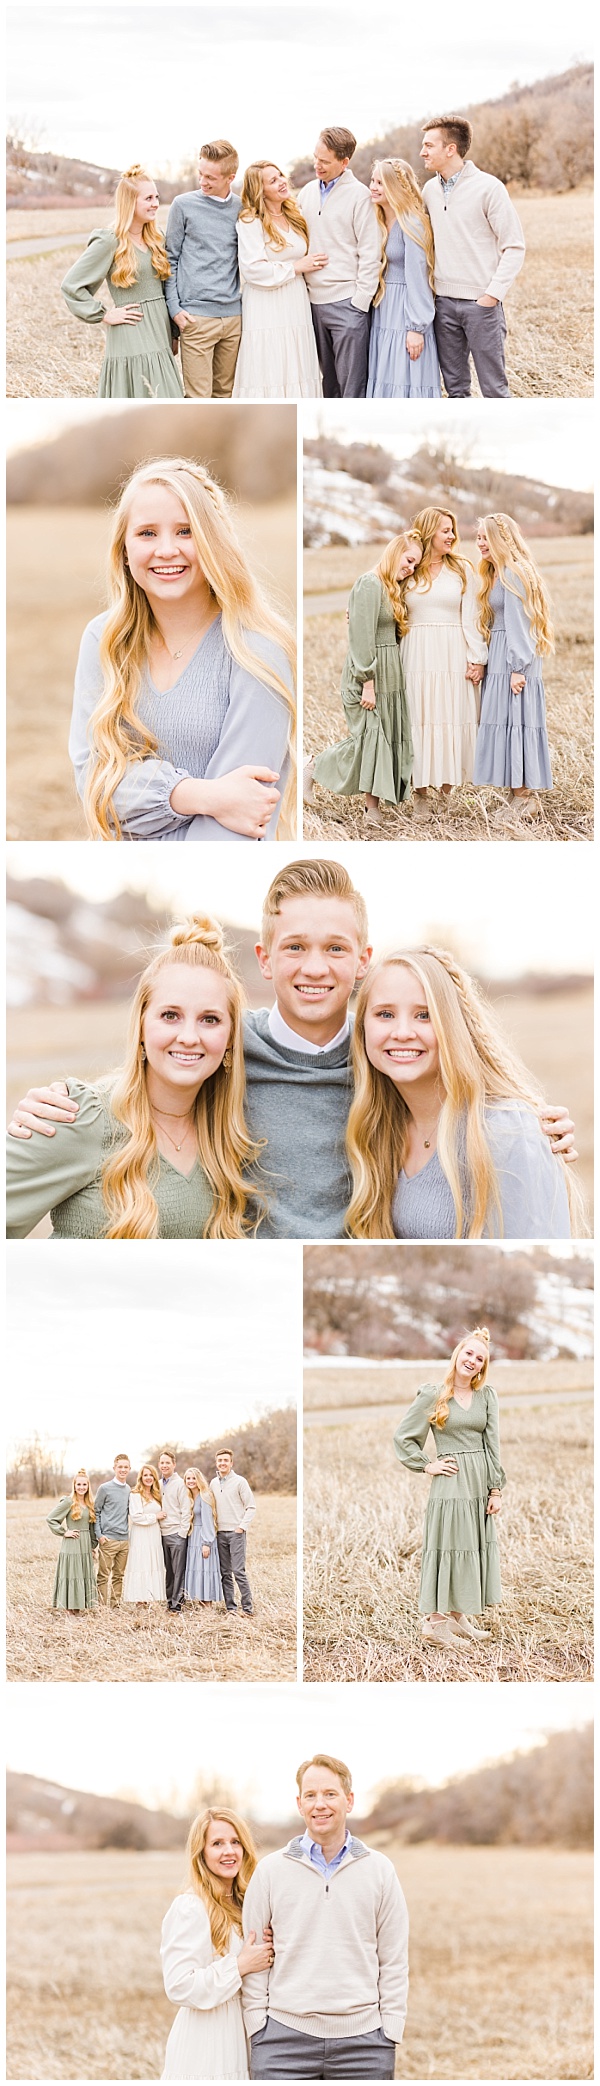 A Unique Way to Style Your Family Session